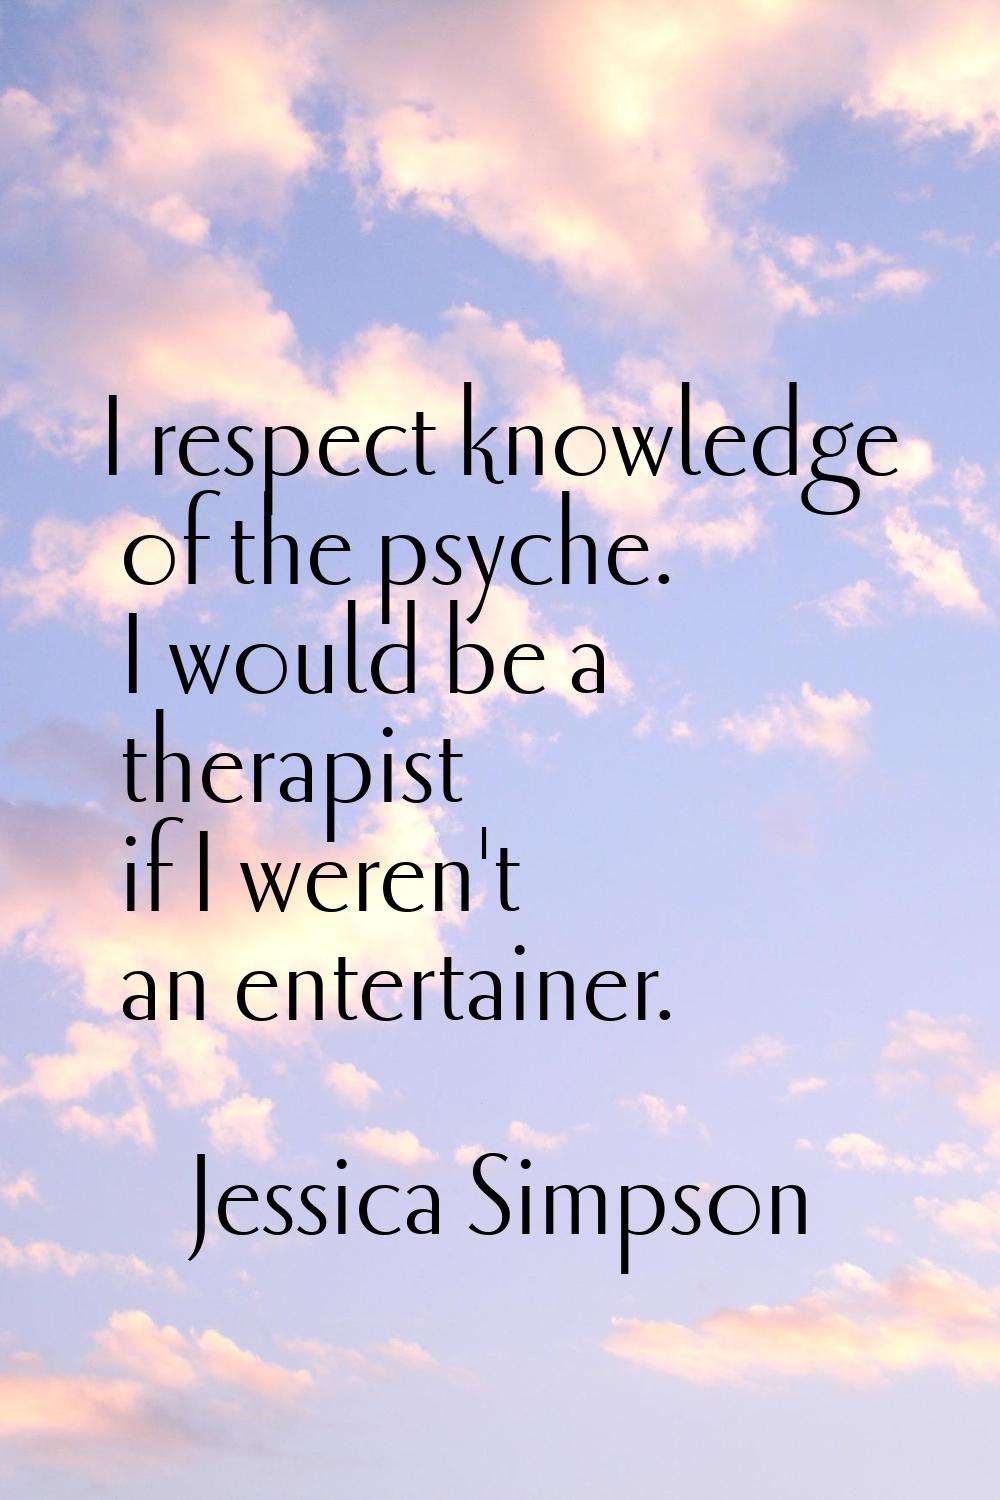 I respect knowledge of the psyche. I would be a therapist if I weren't an entertainer.